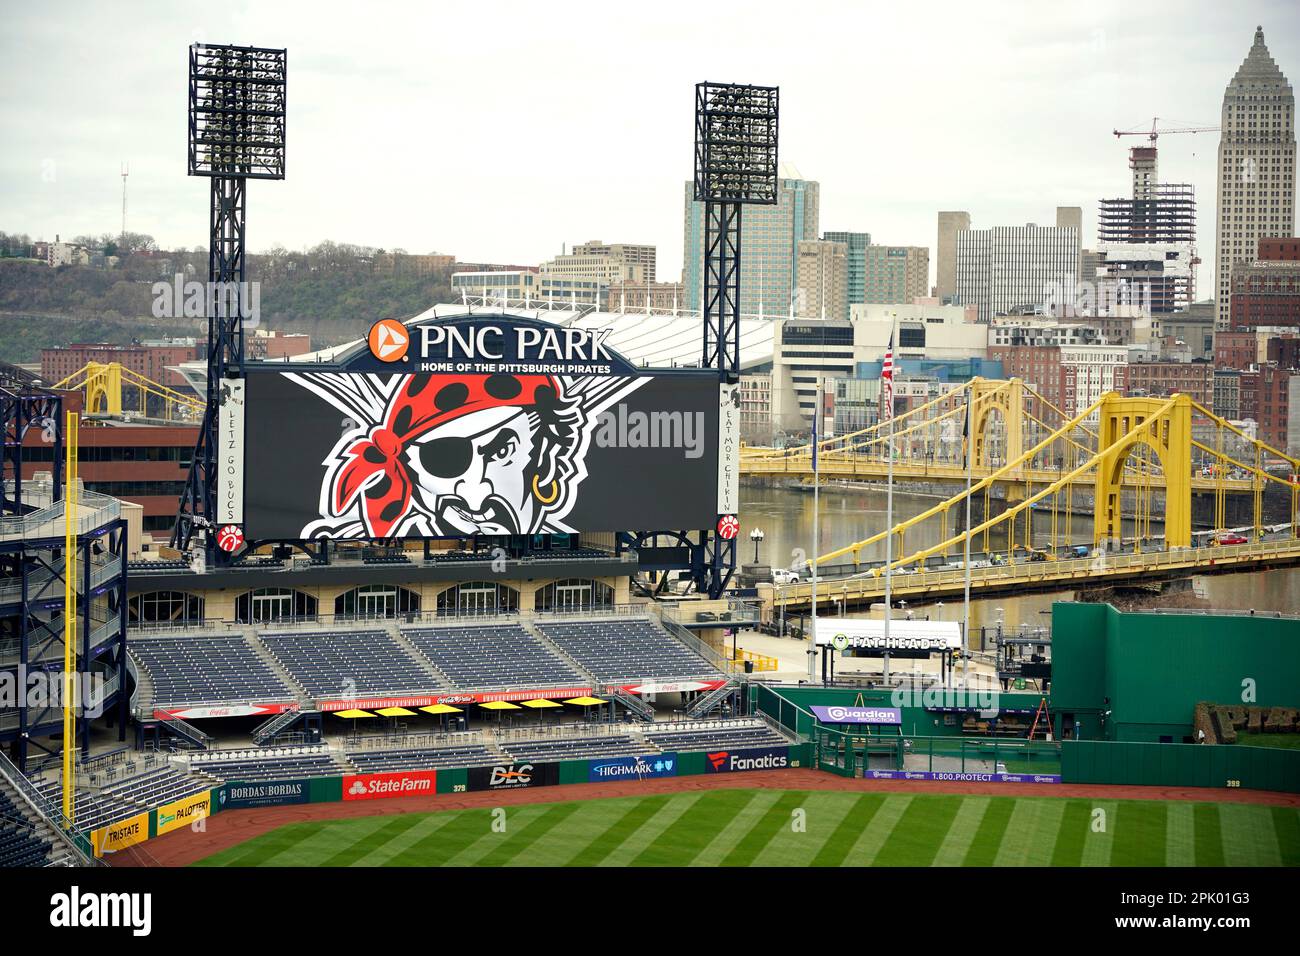 This is the new LED scoreboard at PNC Park, during a media preview